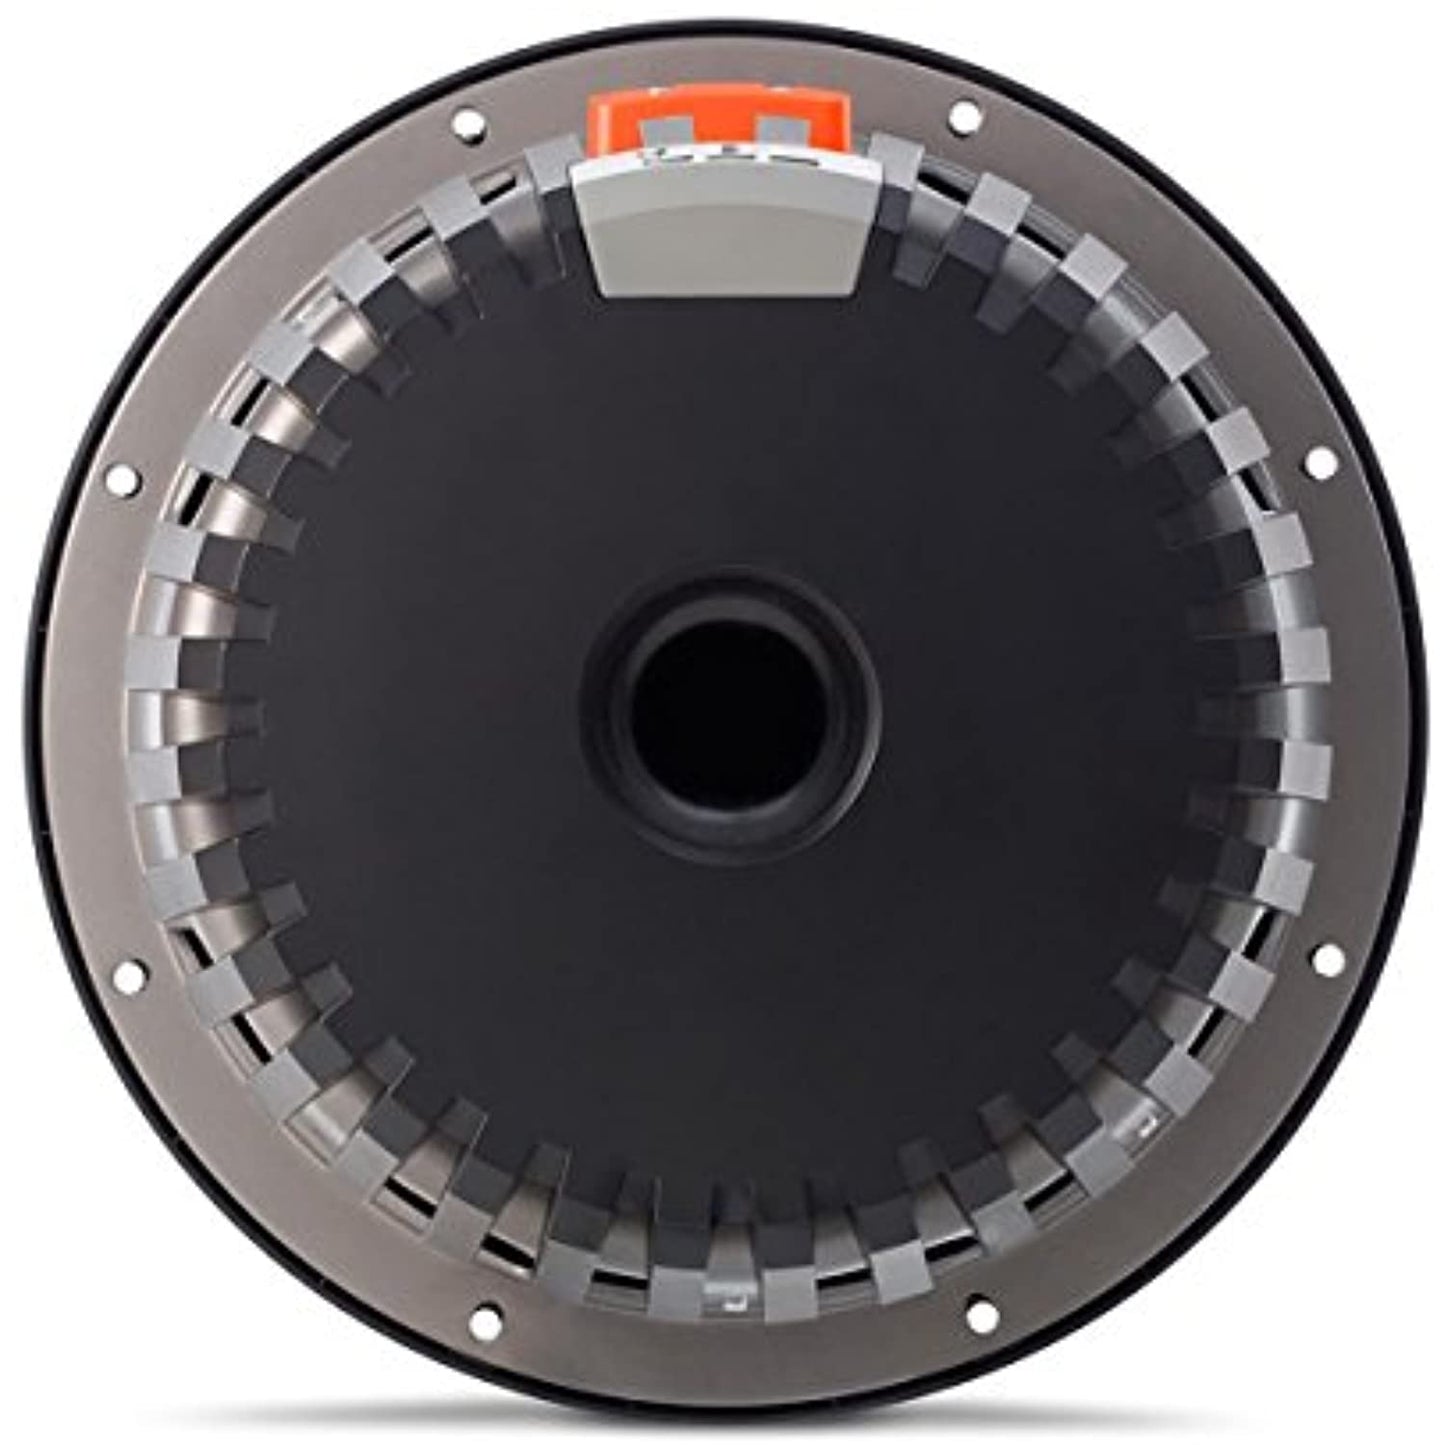 JBL S3-1024 10" SUBWOOFER Series III 2-OHM OR 4-OHM Selectable 1350 WATTS MAX CAR Audio Speaker